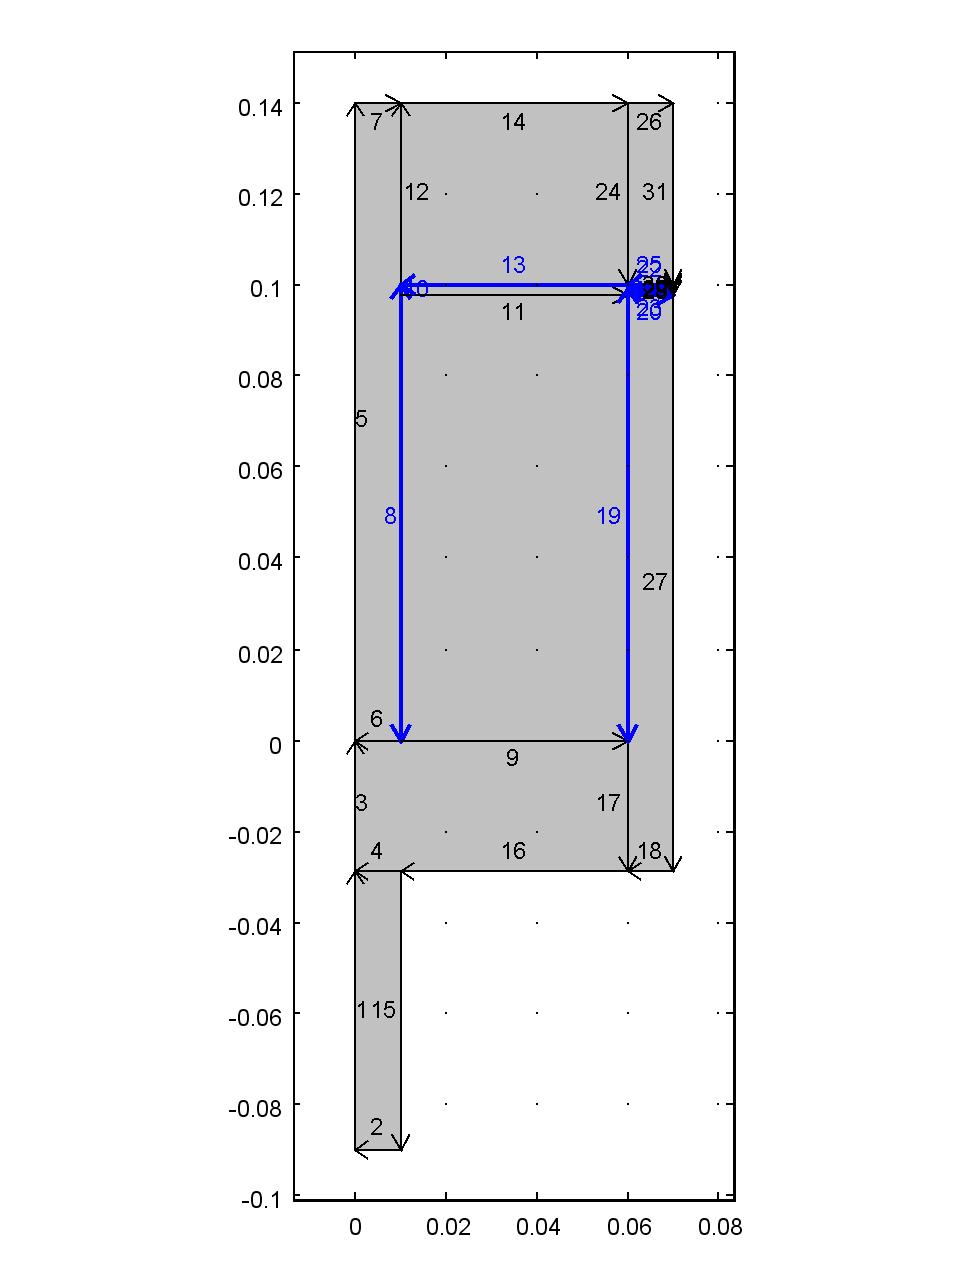 Figure 7. Boundary conditions with no slip condition (left) for fixed wall and moving wall (right) respectively. 4.